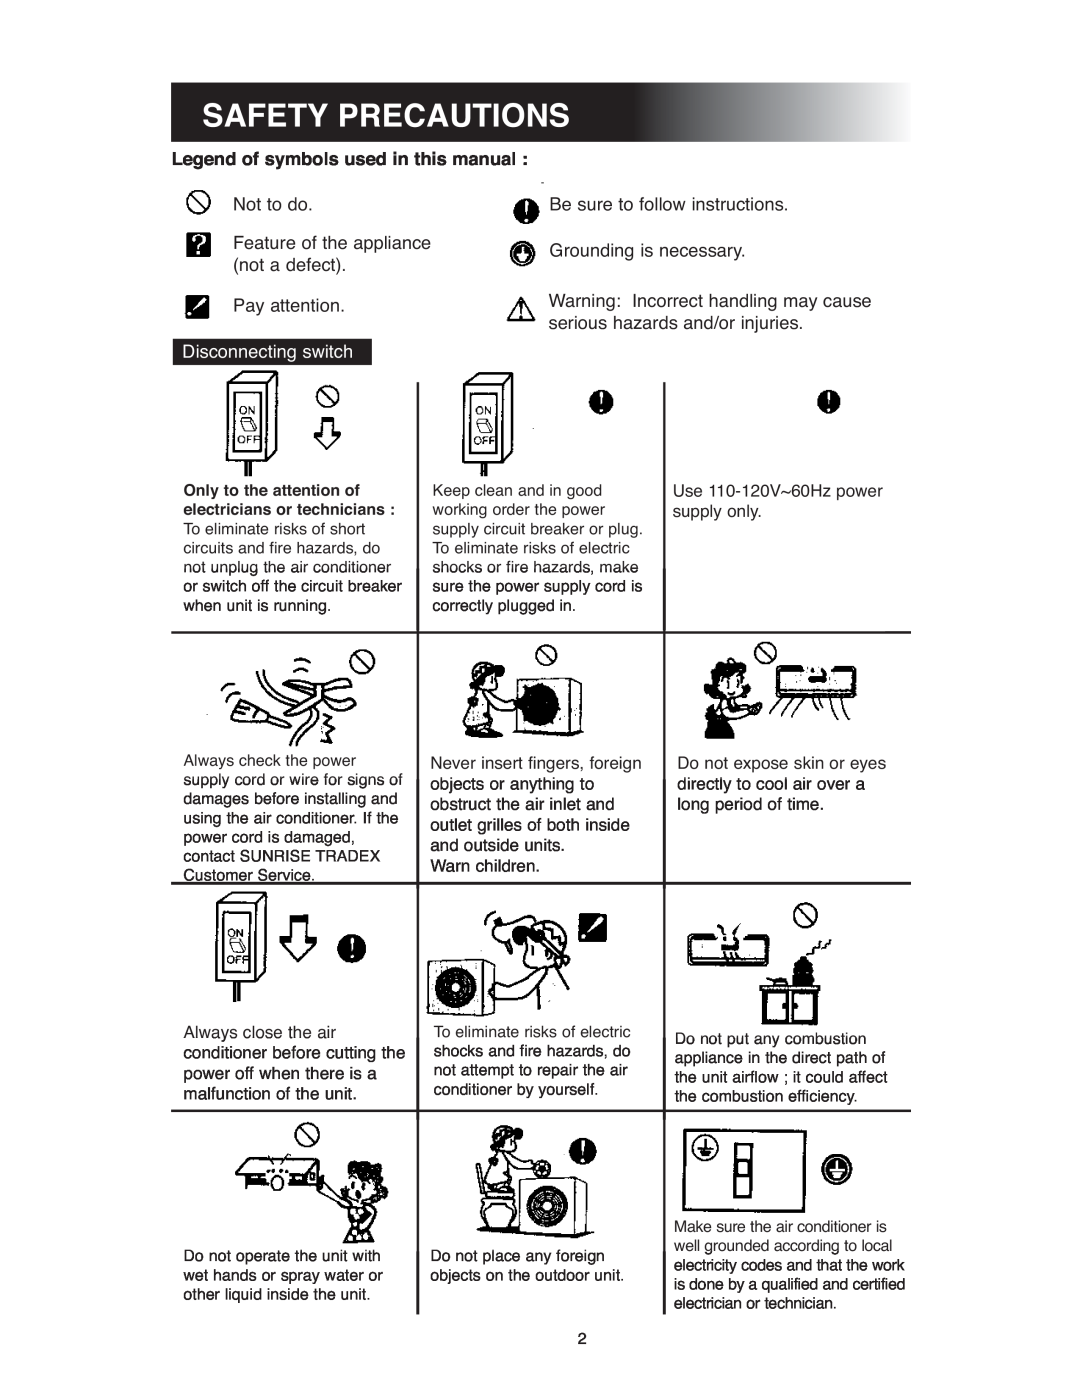 Sunrise Global 13-05020, 13-05024 Safety Precautions, Legend of symbols used in this manual, Disconnecting switch 